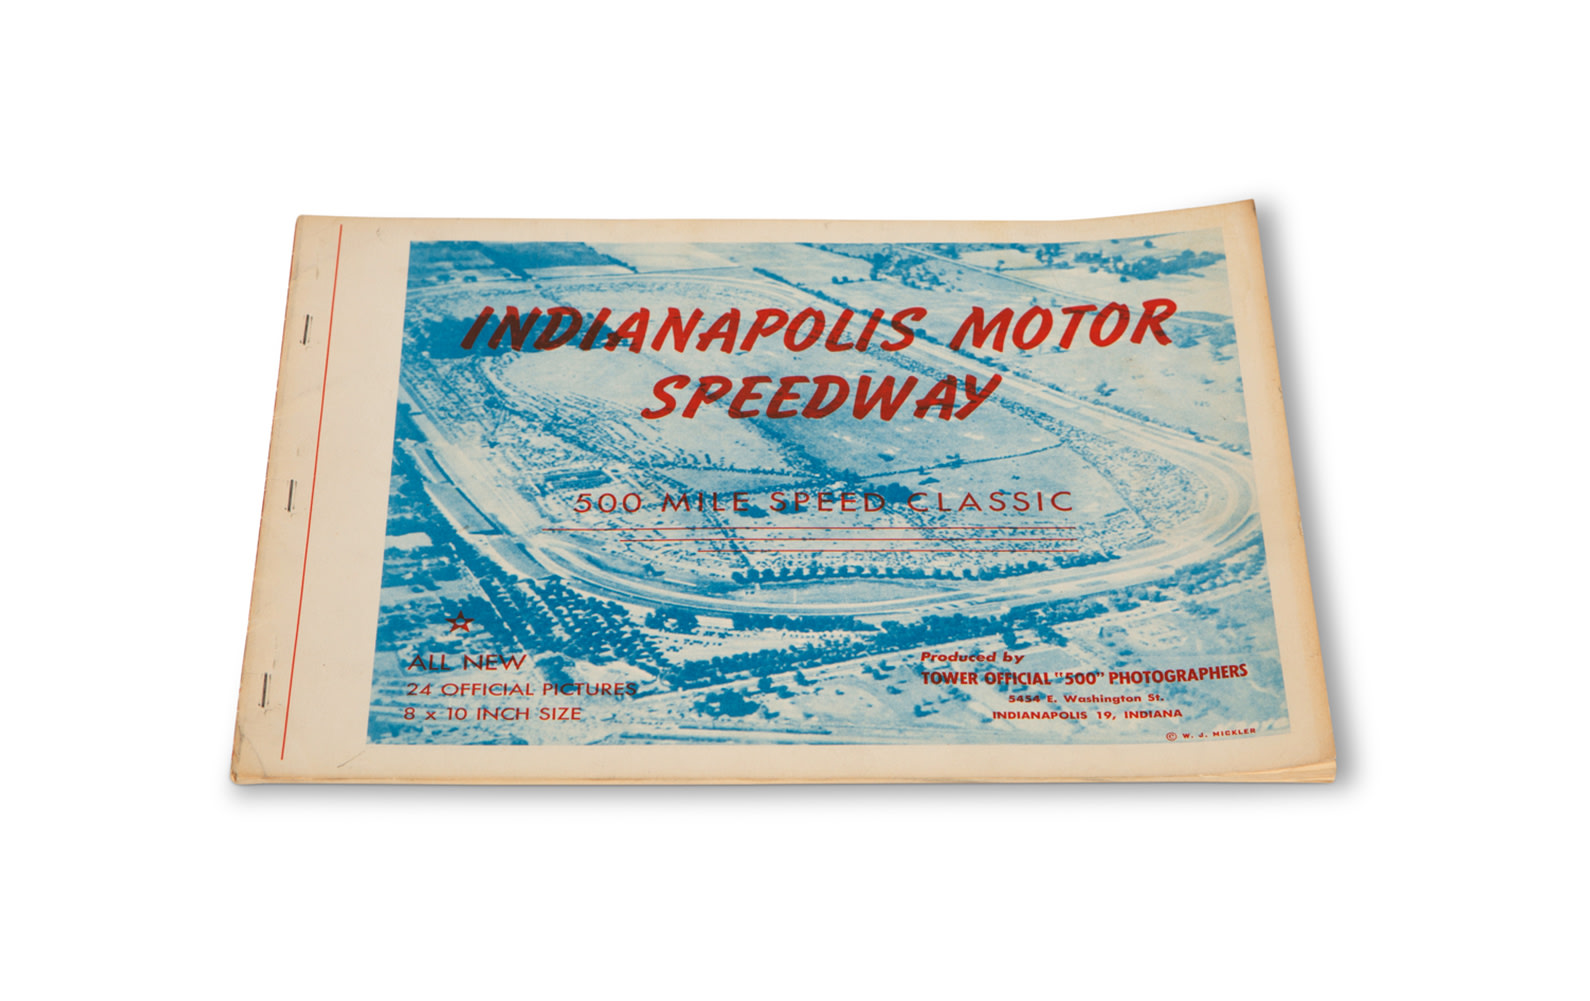 1948 Indianapolis Motor Speedway Official Photo Album and Pin